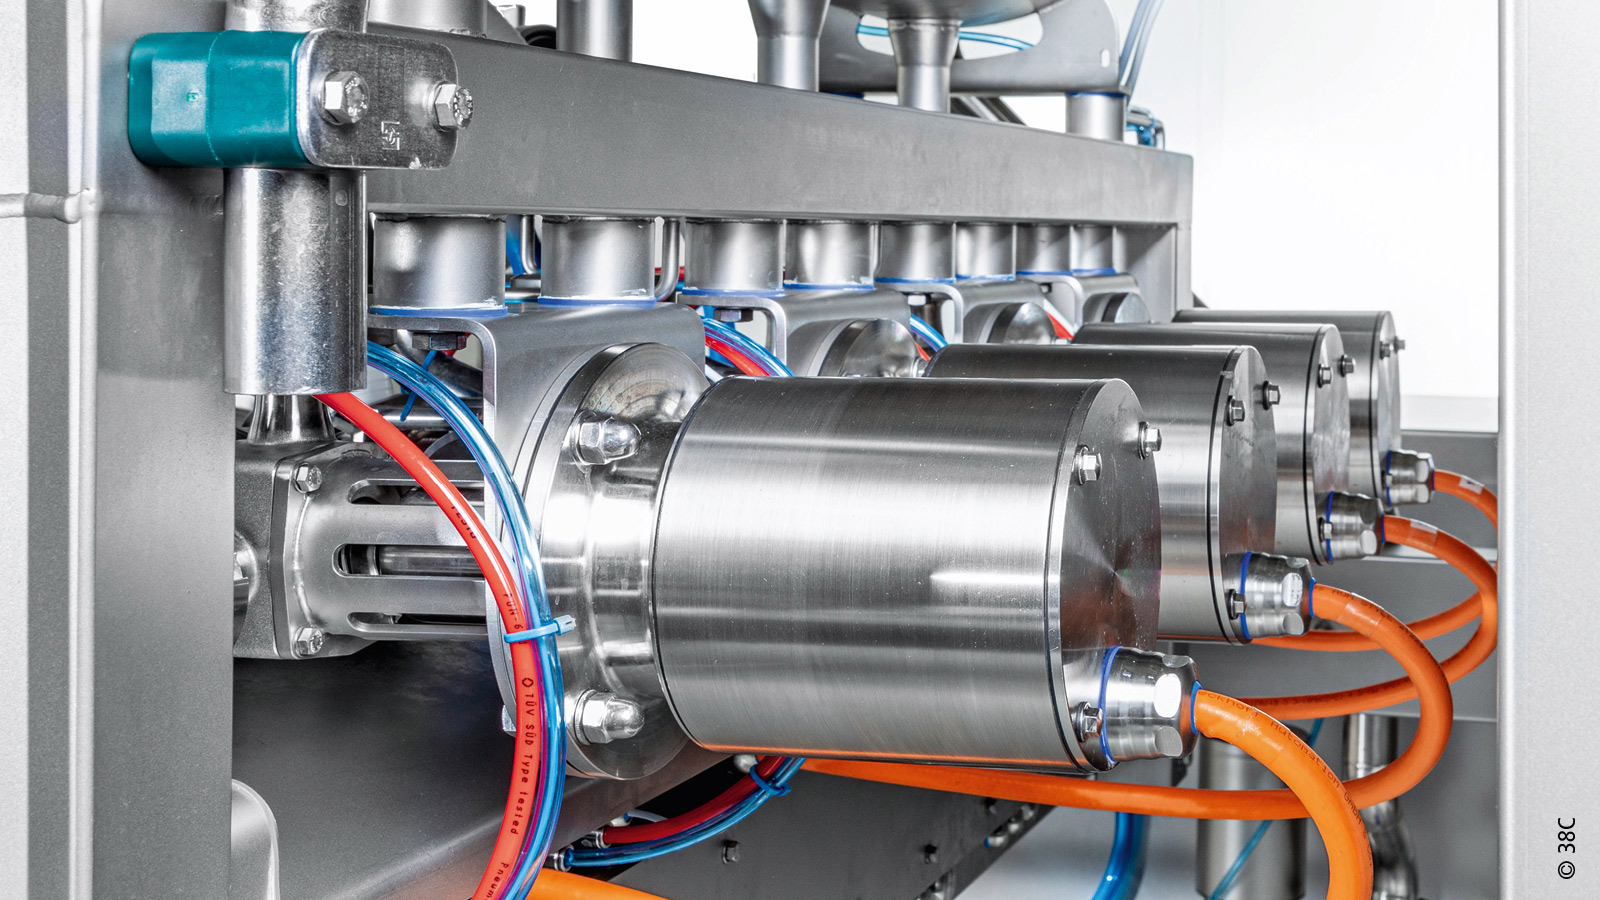 AM8800 stainless steel servomotors controlled by the AX8000 multi-axis servo system reliably pump the sauce through the print heads. 